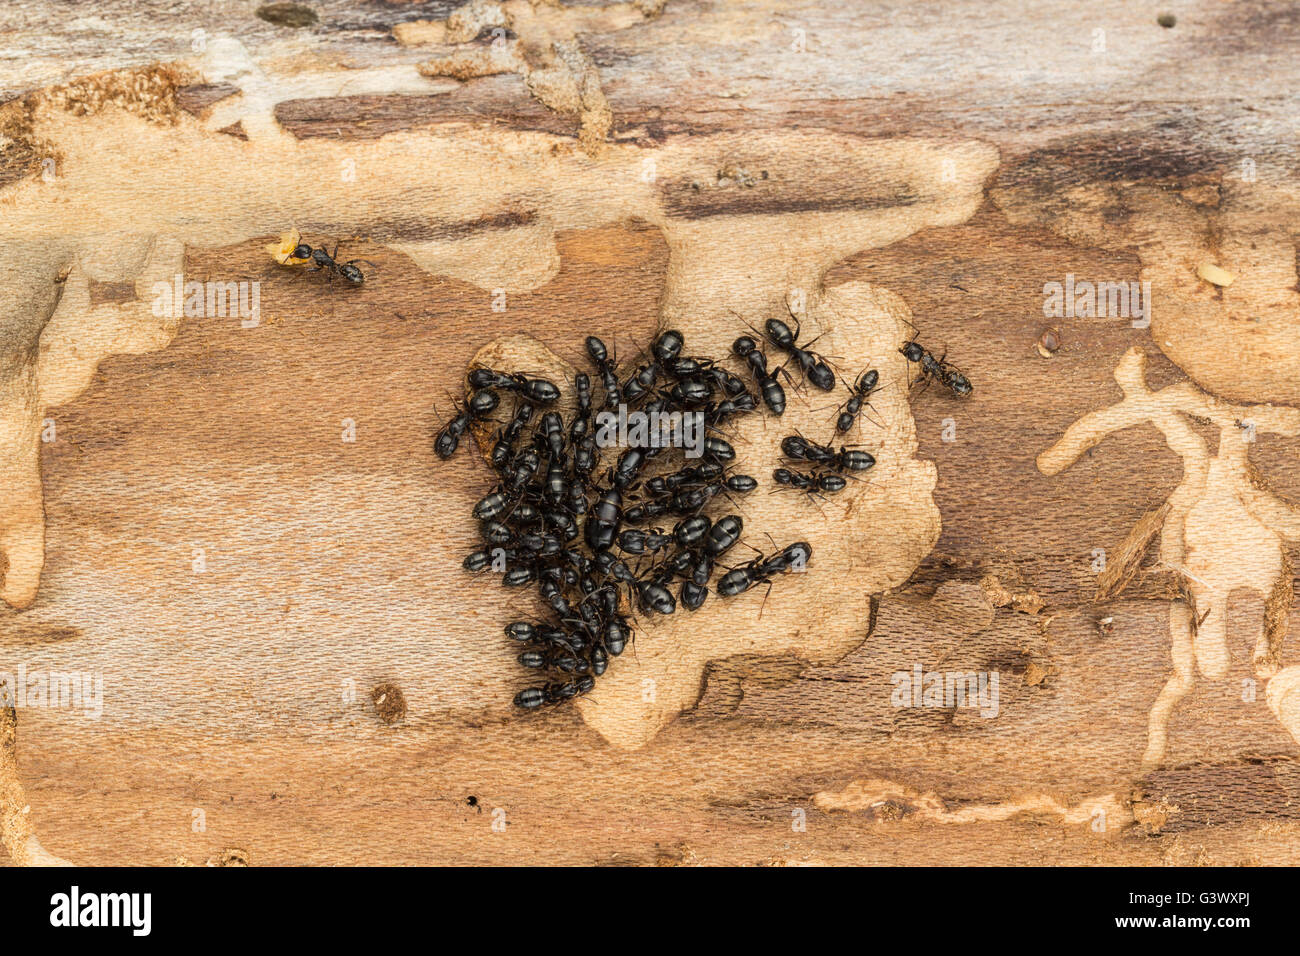 Close up of ant colony with queen and offspring, found under bark of pine tree firewood. Likely carpenter ants Camponotus Stock Photo